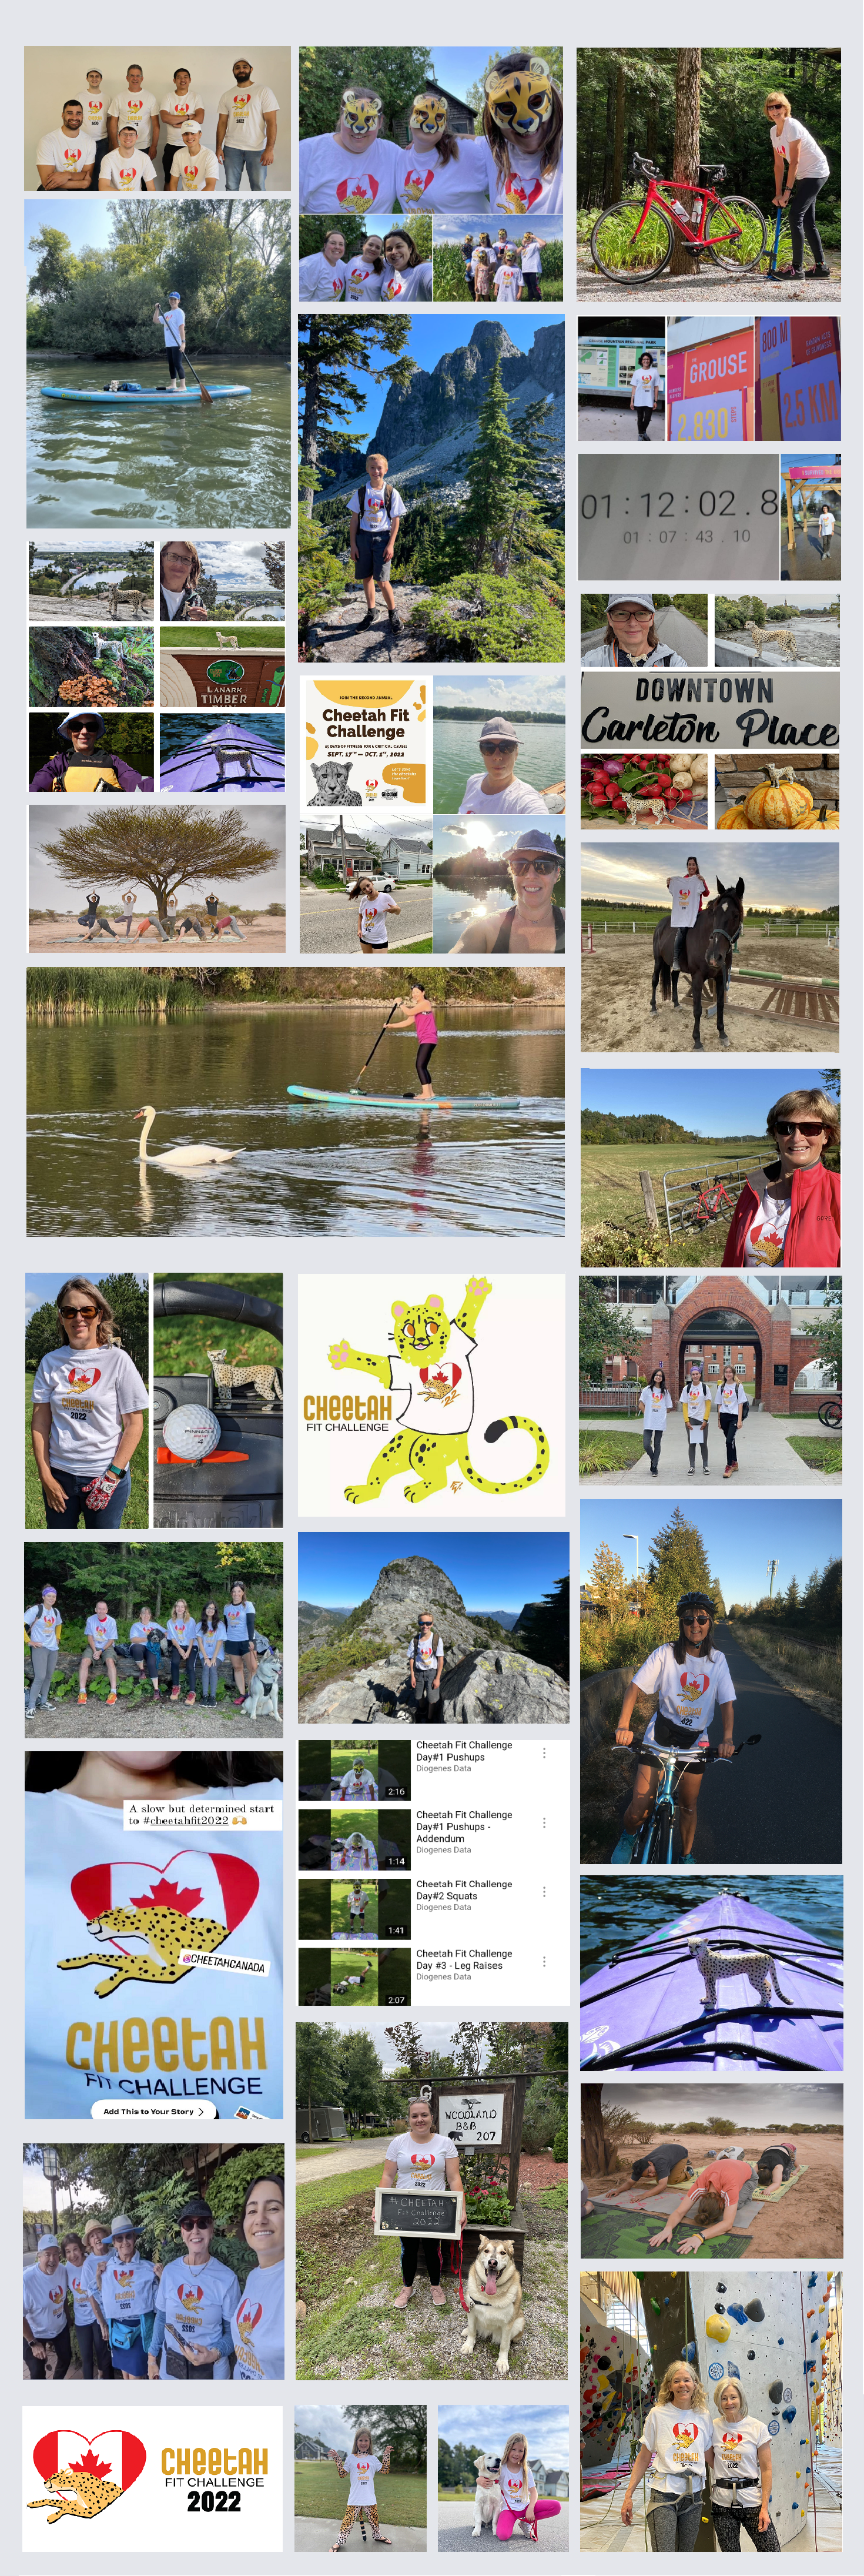 Collage of participant images from Cheetah Fit Challenge 2022